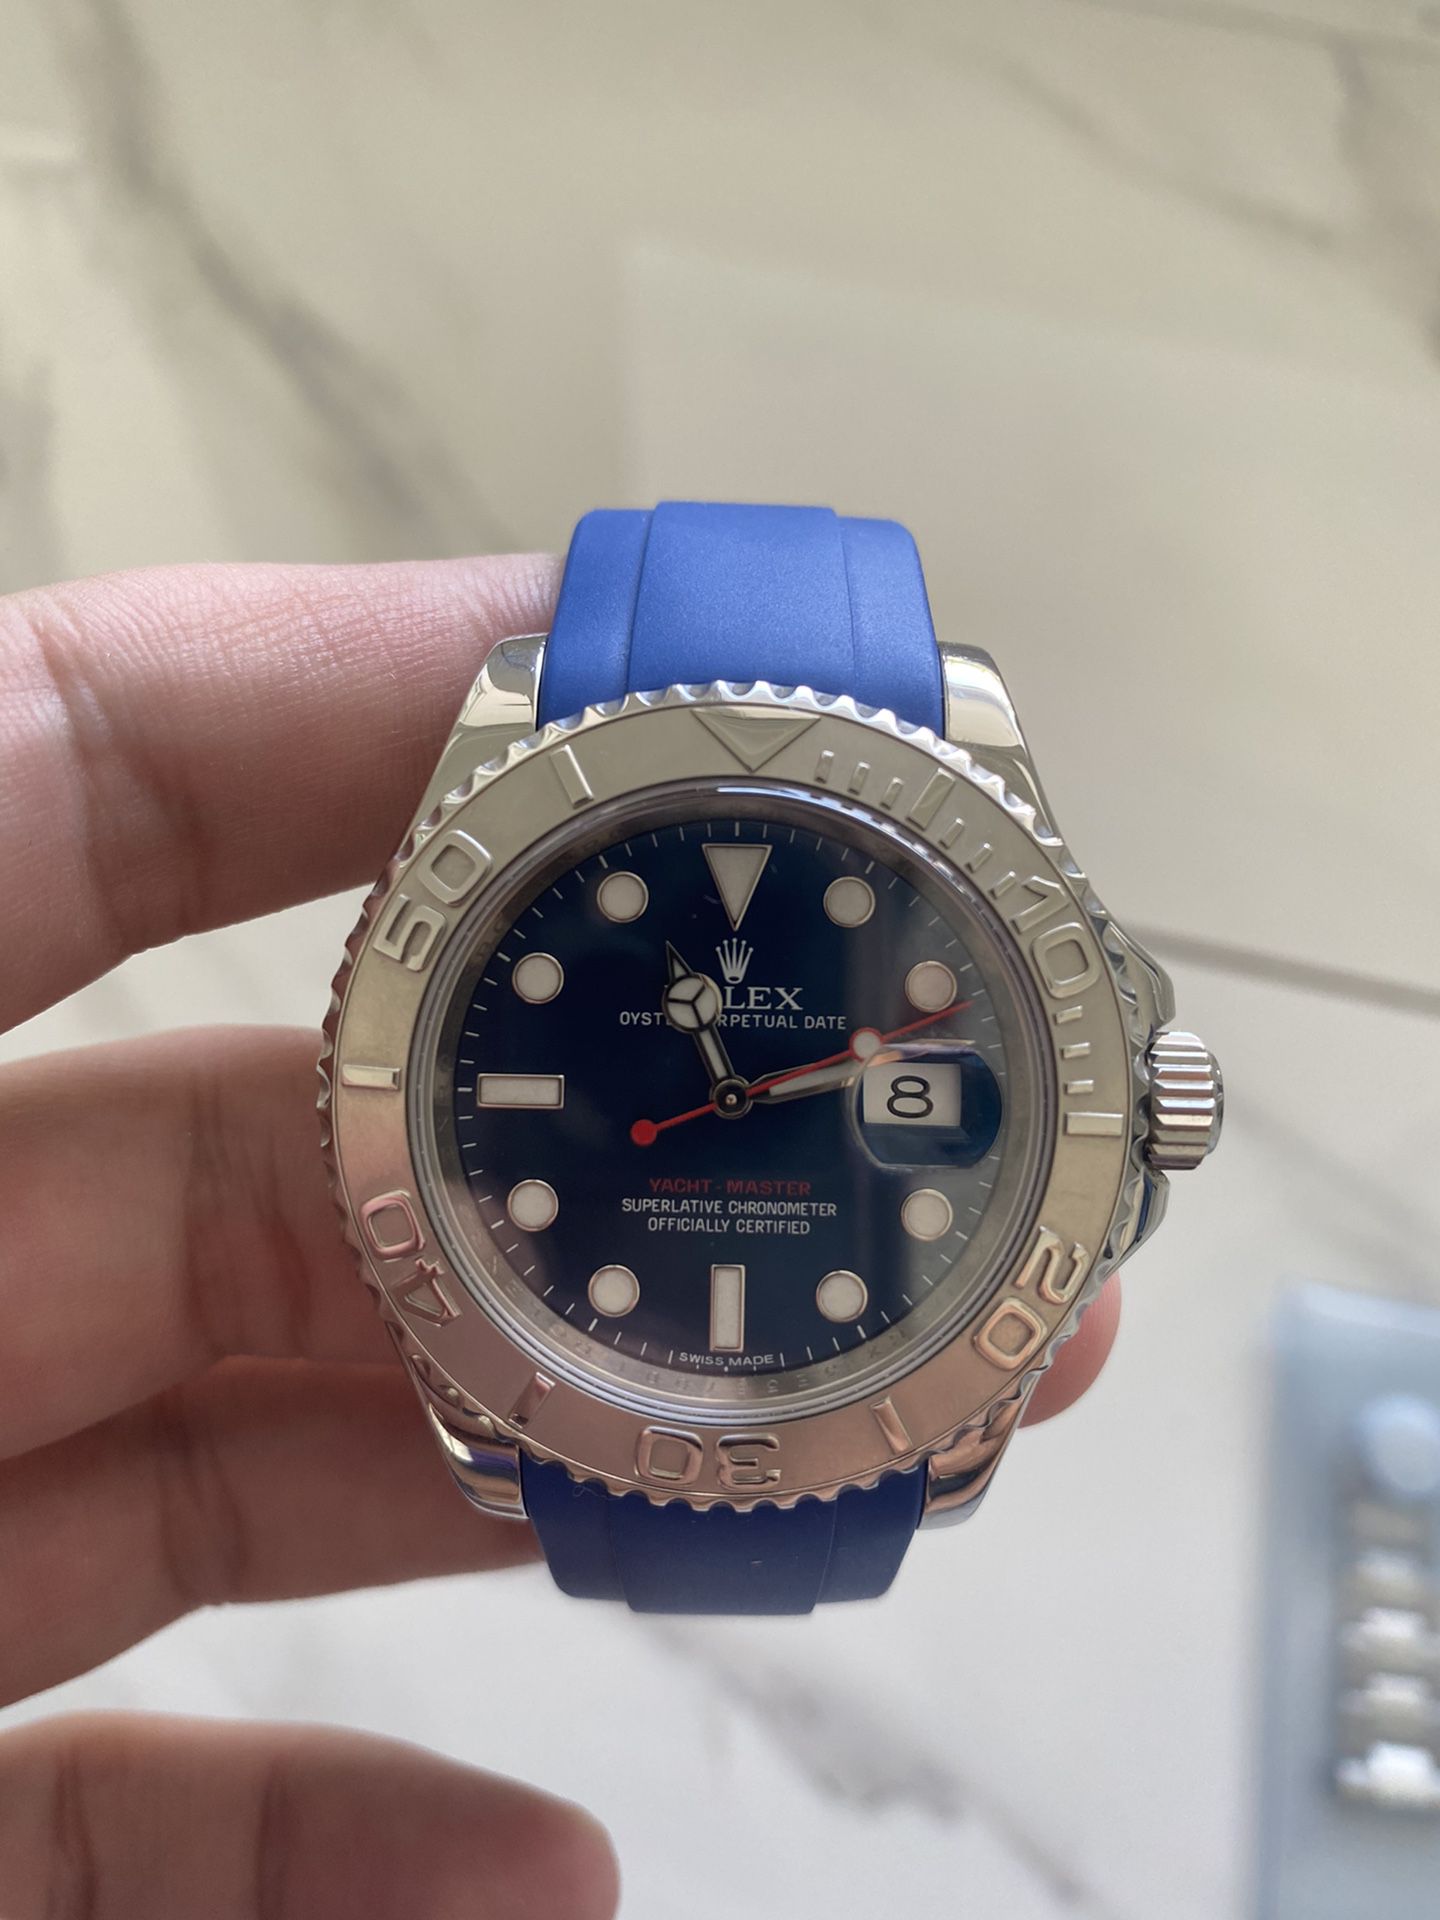 Rolex Yacht Master 1 Blue Dial for Sale in Miami, FL - OfferUp